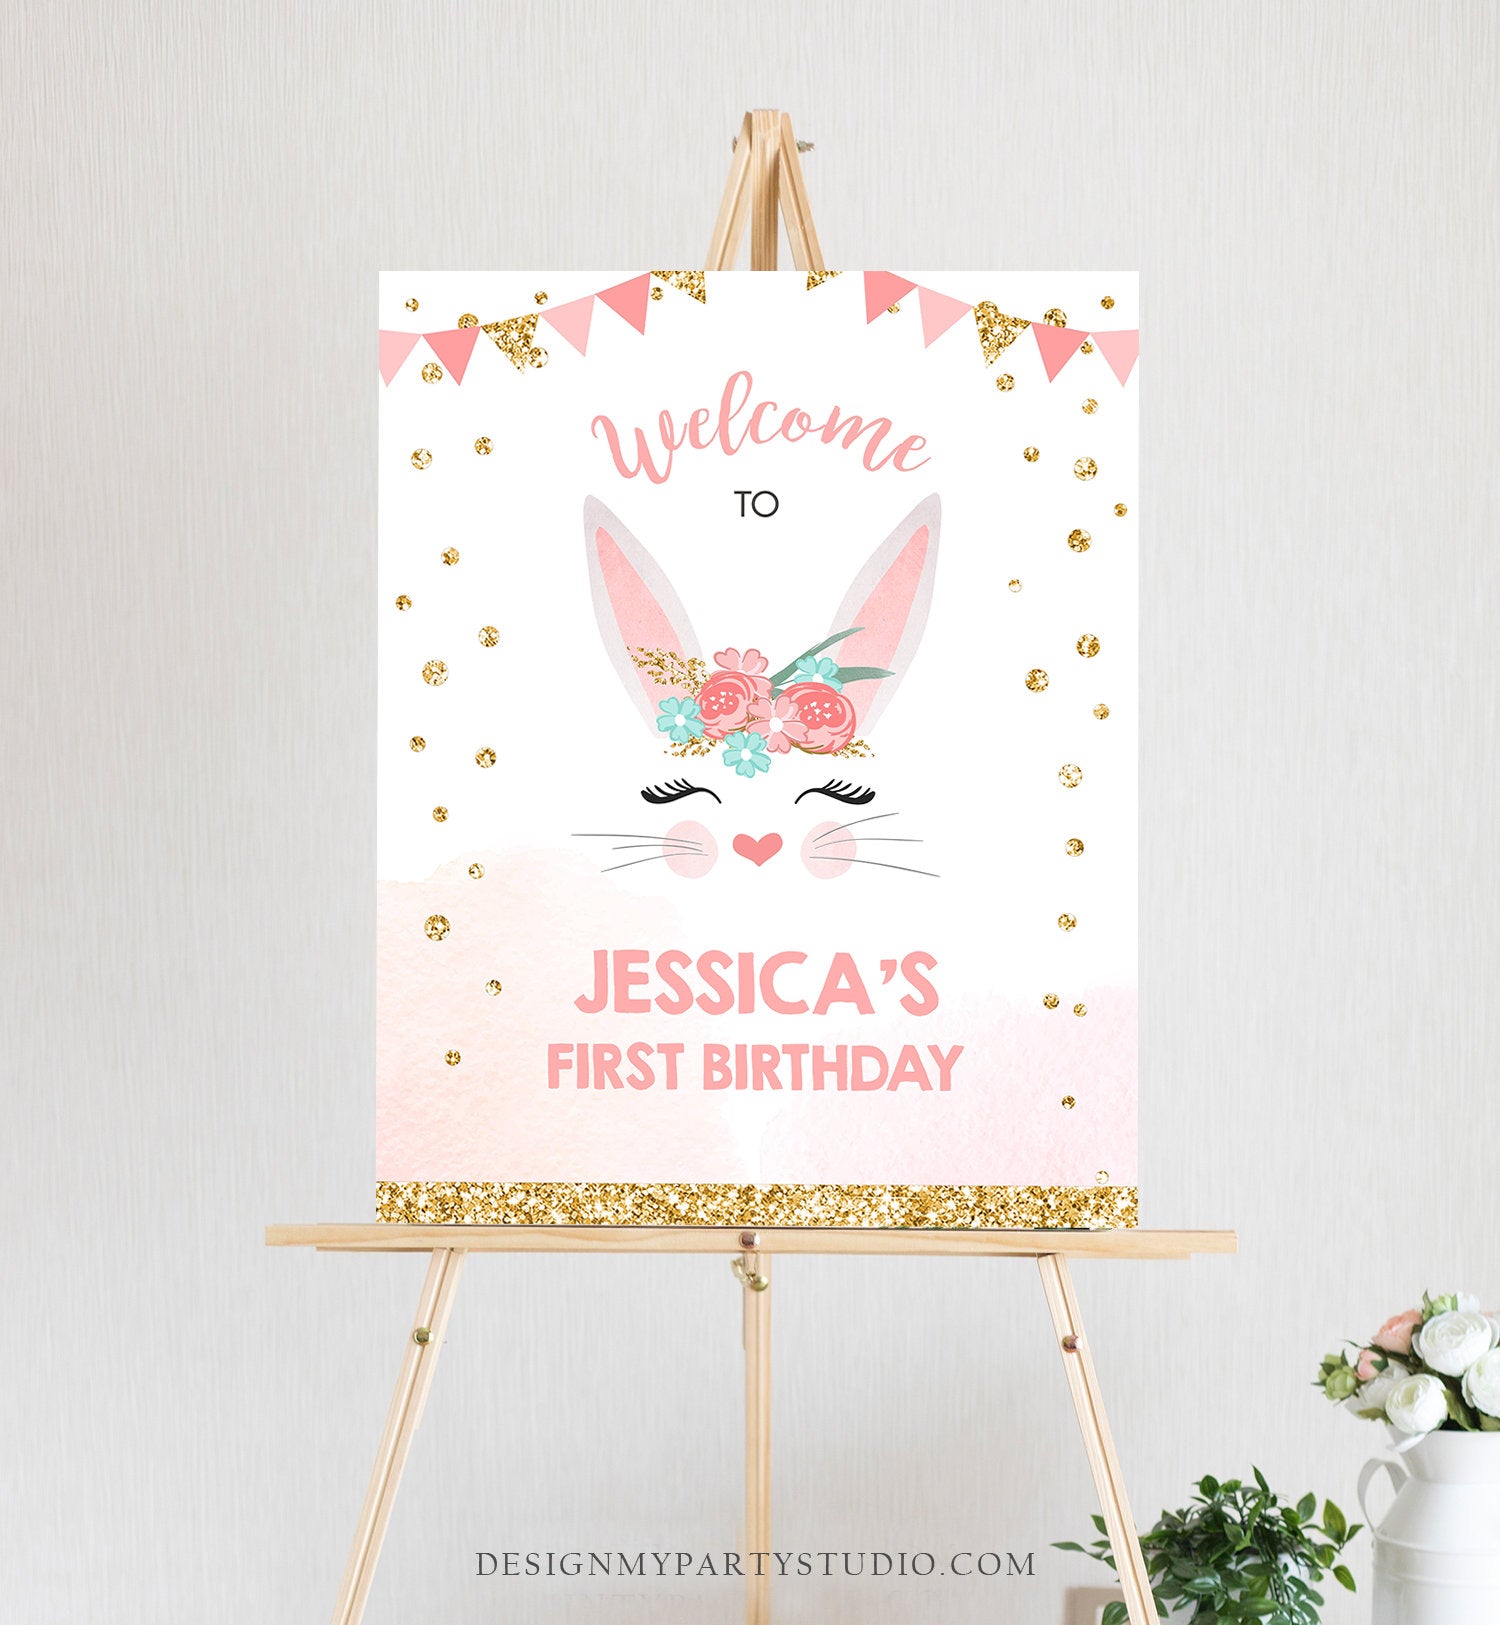 Editable Bunny Welcome Sign Bunny Birthday Welcome Sign Girl Pink Gold Floral Flowers Spring Bunny Face Easter Template PRINTABLE Corjl 0238